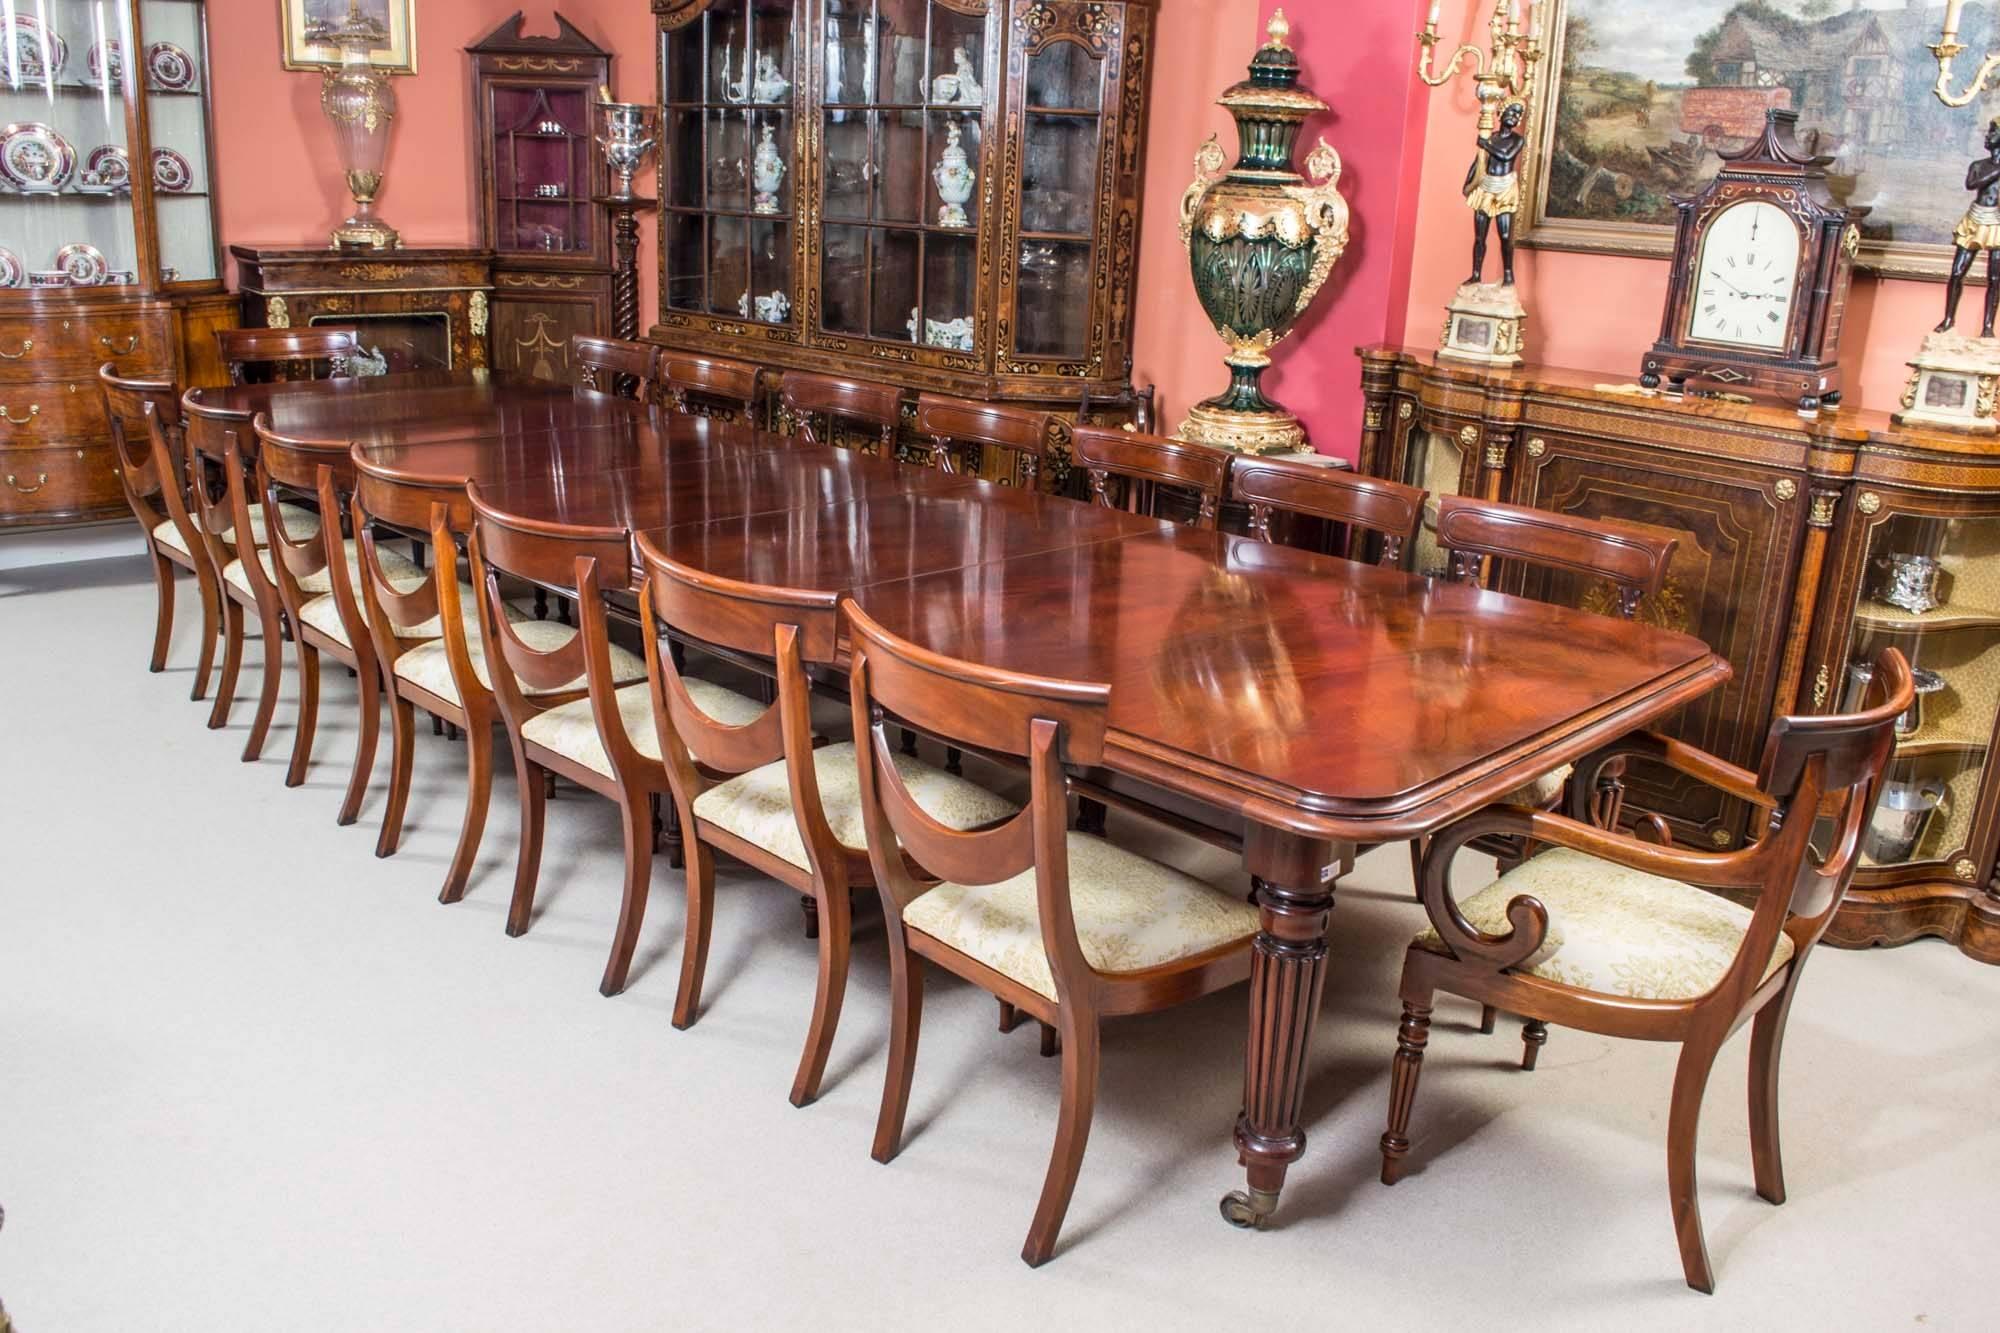 This is a fantastic vintage Victorian style dining set of dining table complete with sixteen matching drape back chairs. 

This flame mahogany dining table has three leaves, they measure 60 cm each and can be added or removed as required to suit